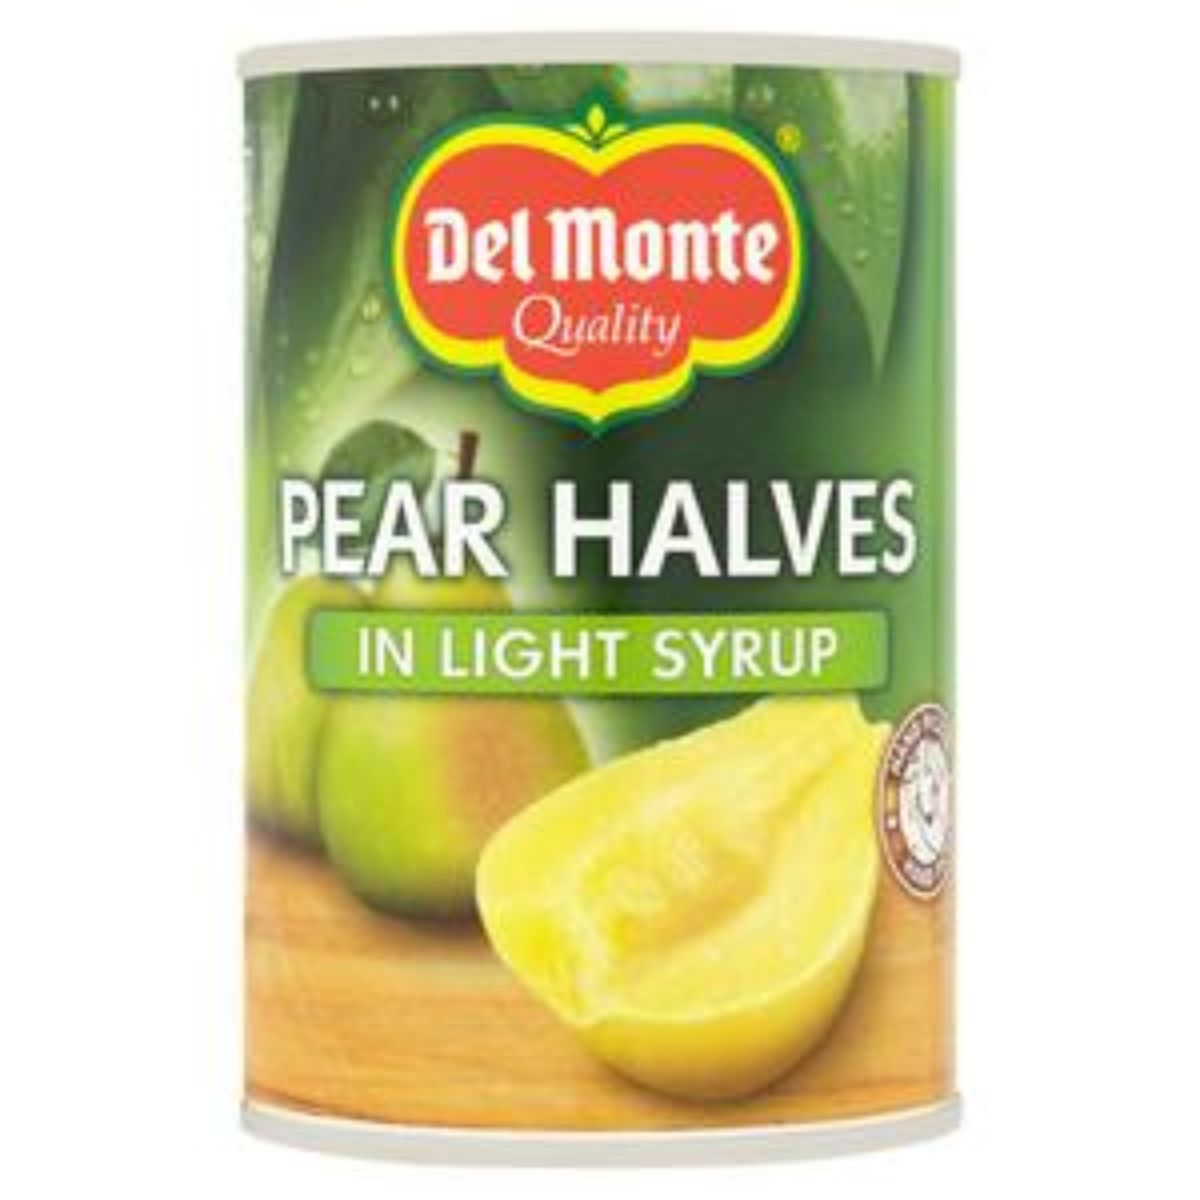 Del Monte - Pear Halves in Light Syrup - 235g.